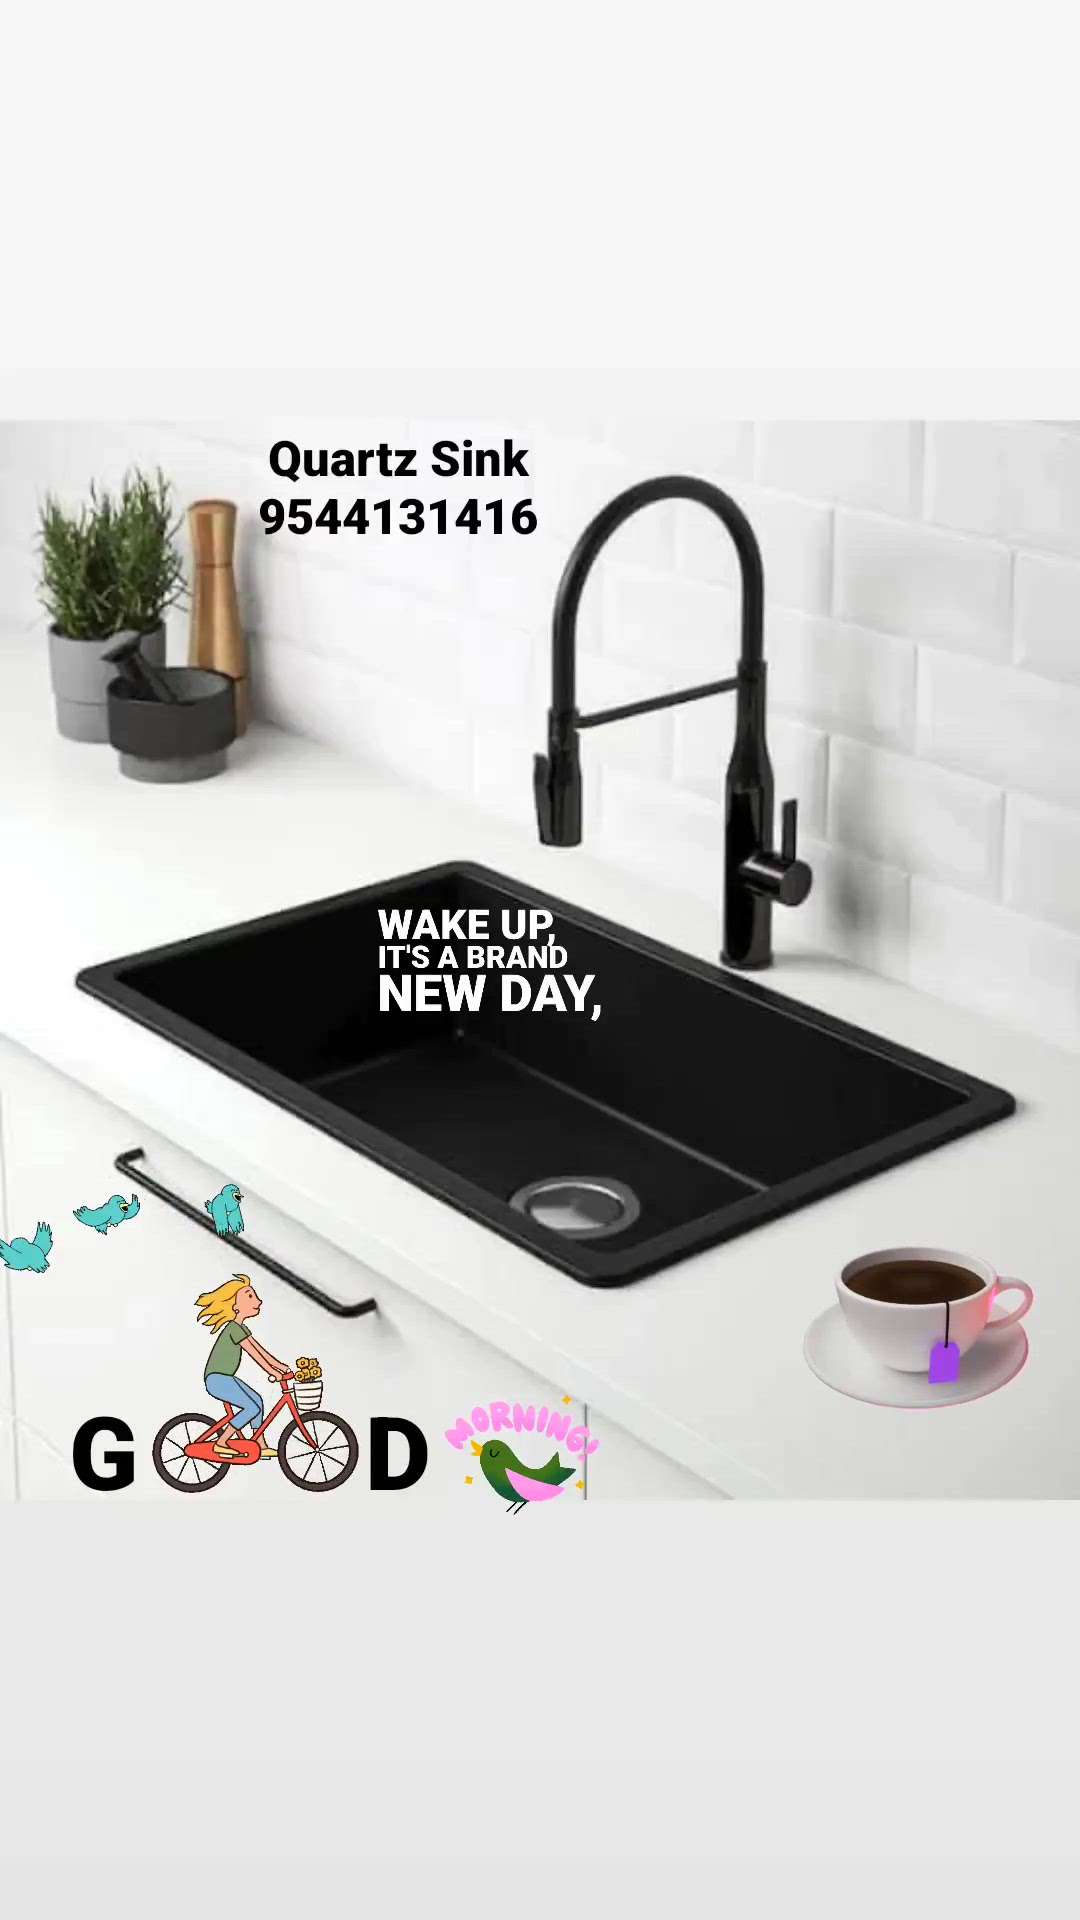 Product specification : 👇👇👇

Quartz Sink
Size 24*18*8.5" / 24*18*10"
Full-body non-porous material
Scratch resistant
Thermal shock resistant
Stain resistant
Colors: Black, Ivory, Grey, Come offee, Grey dot, Whie dot

#quartzsink #aquant #onyxmarble #stonewashbasin #FlooringTiles #walltiles #GraniteFloors #lapothra_tiles